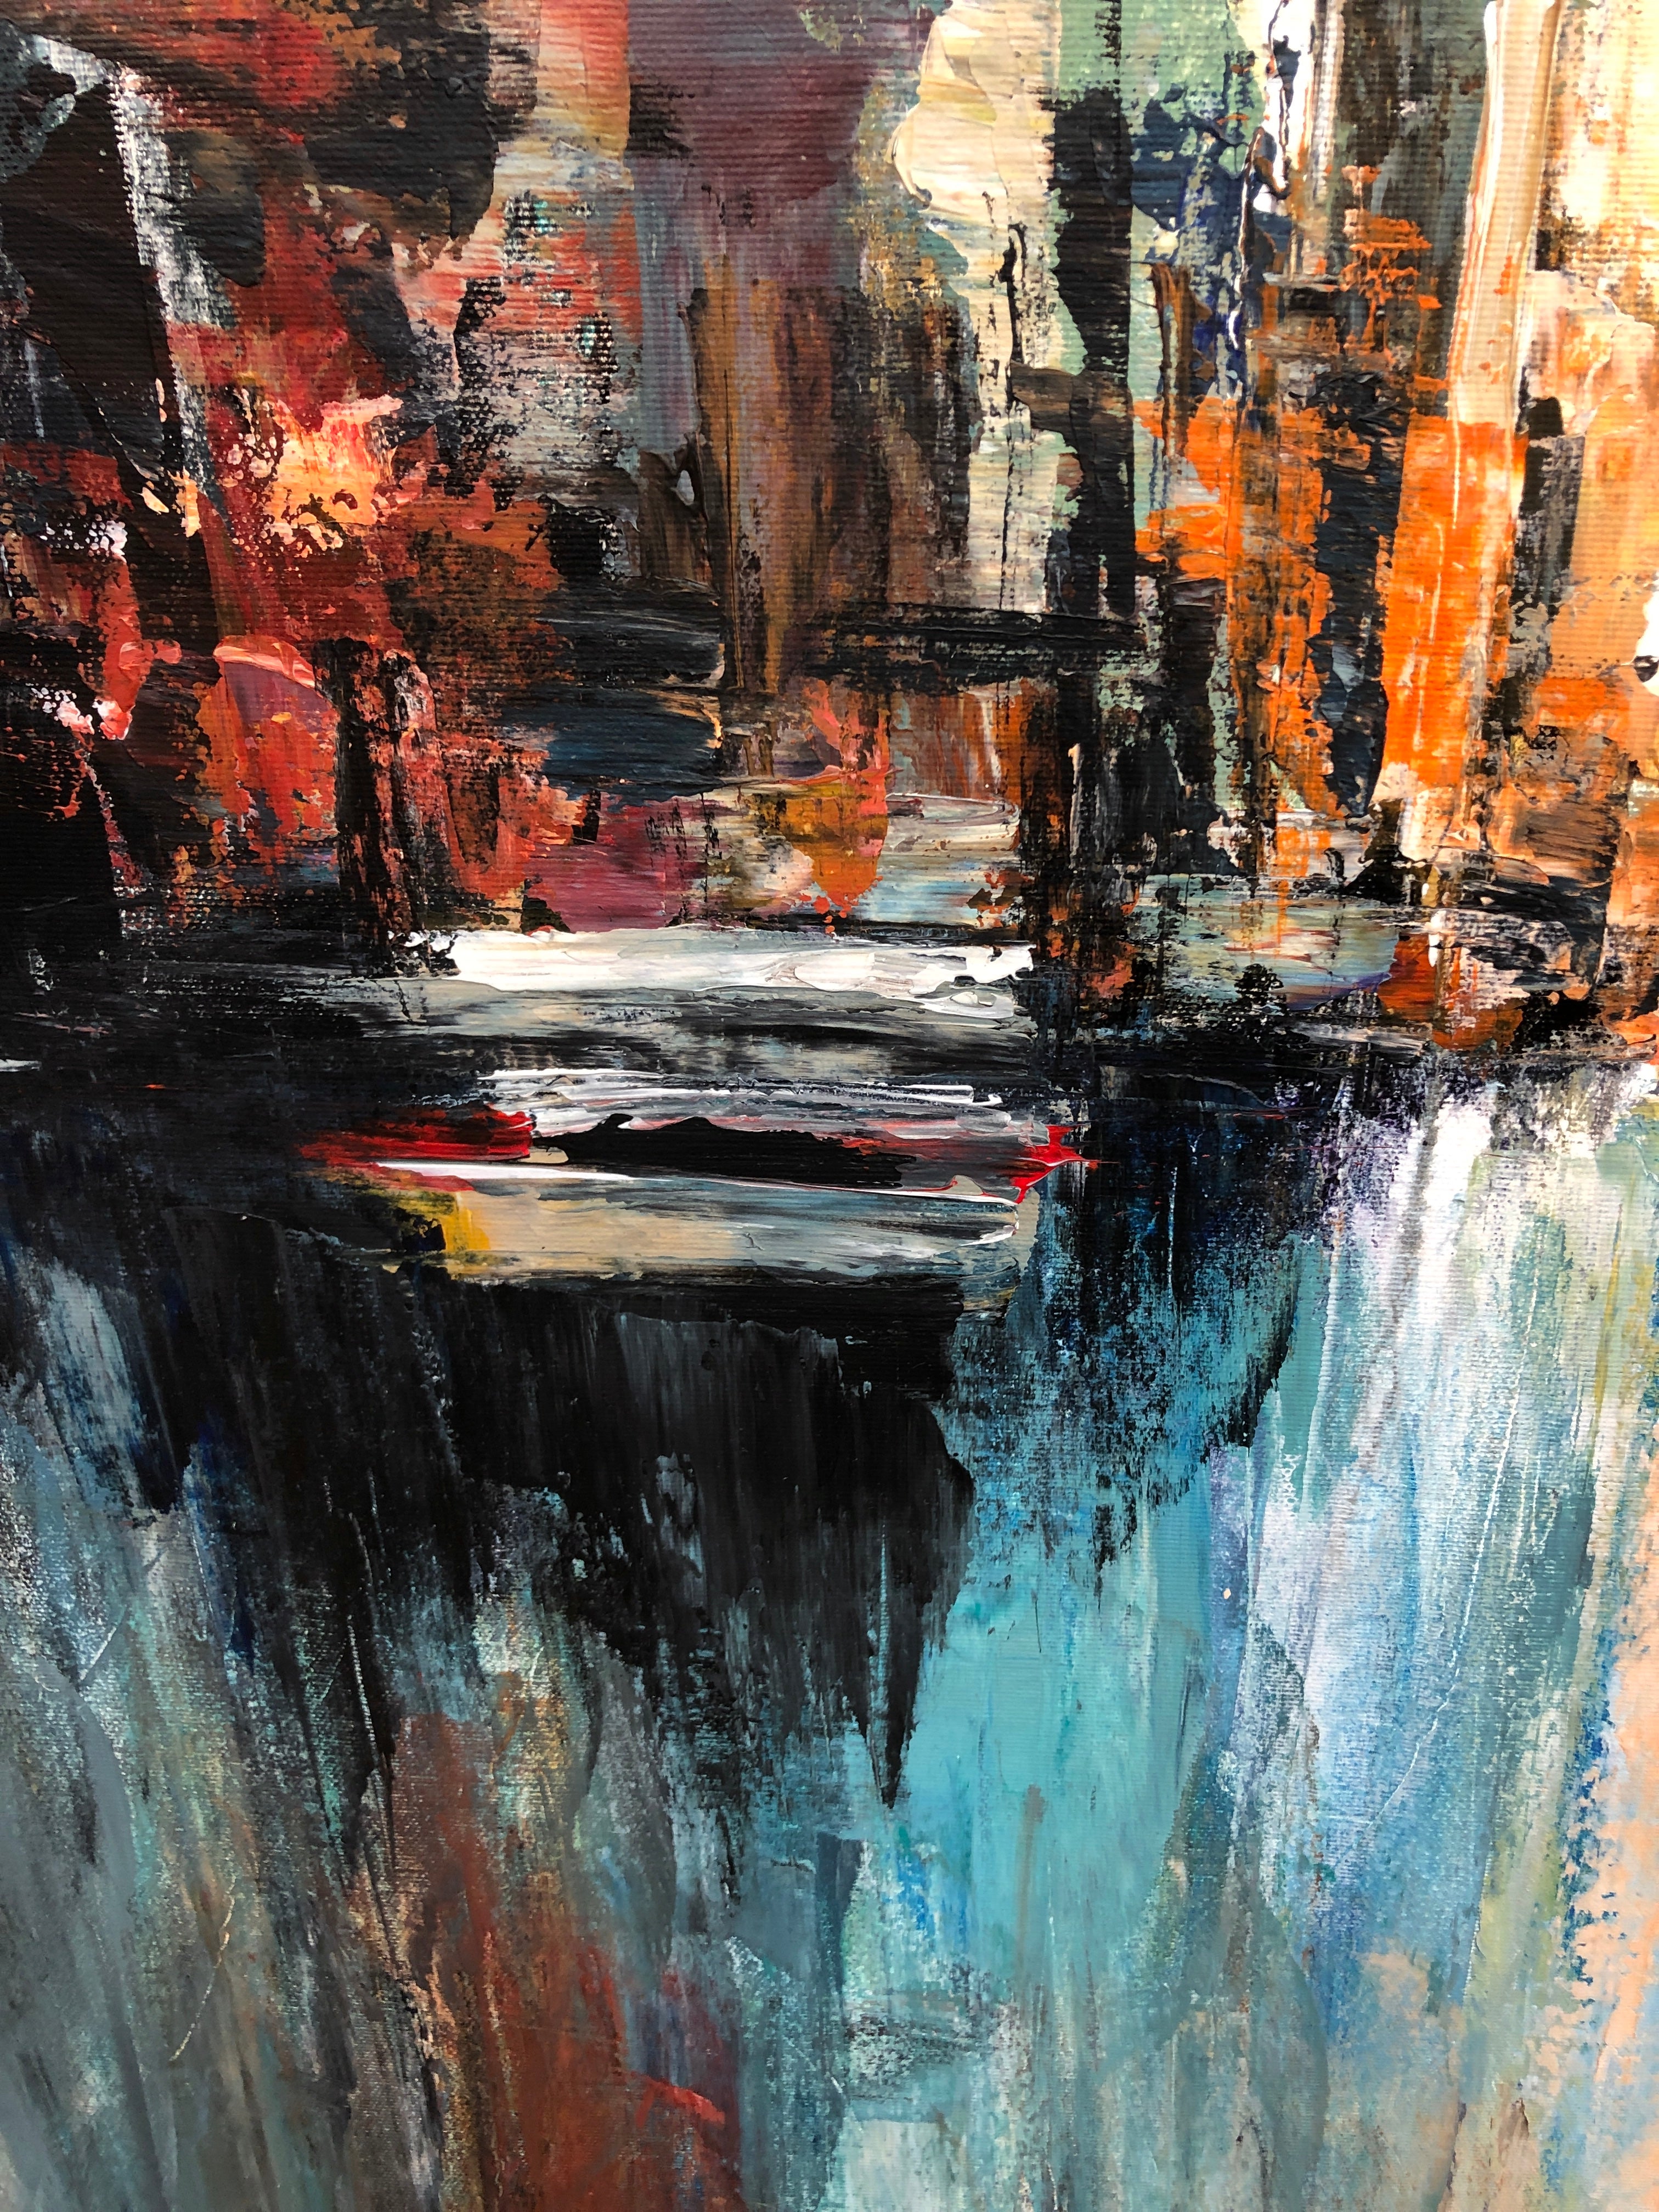 Abstract Chicago Cityscape Paintings On Canvas Original Chicago Street